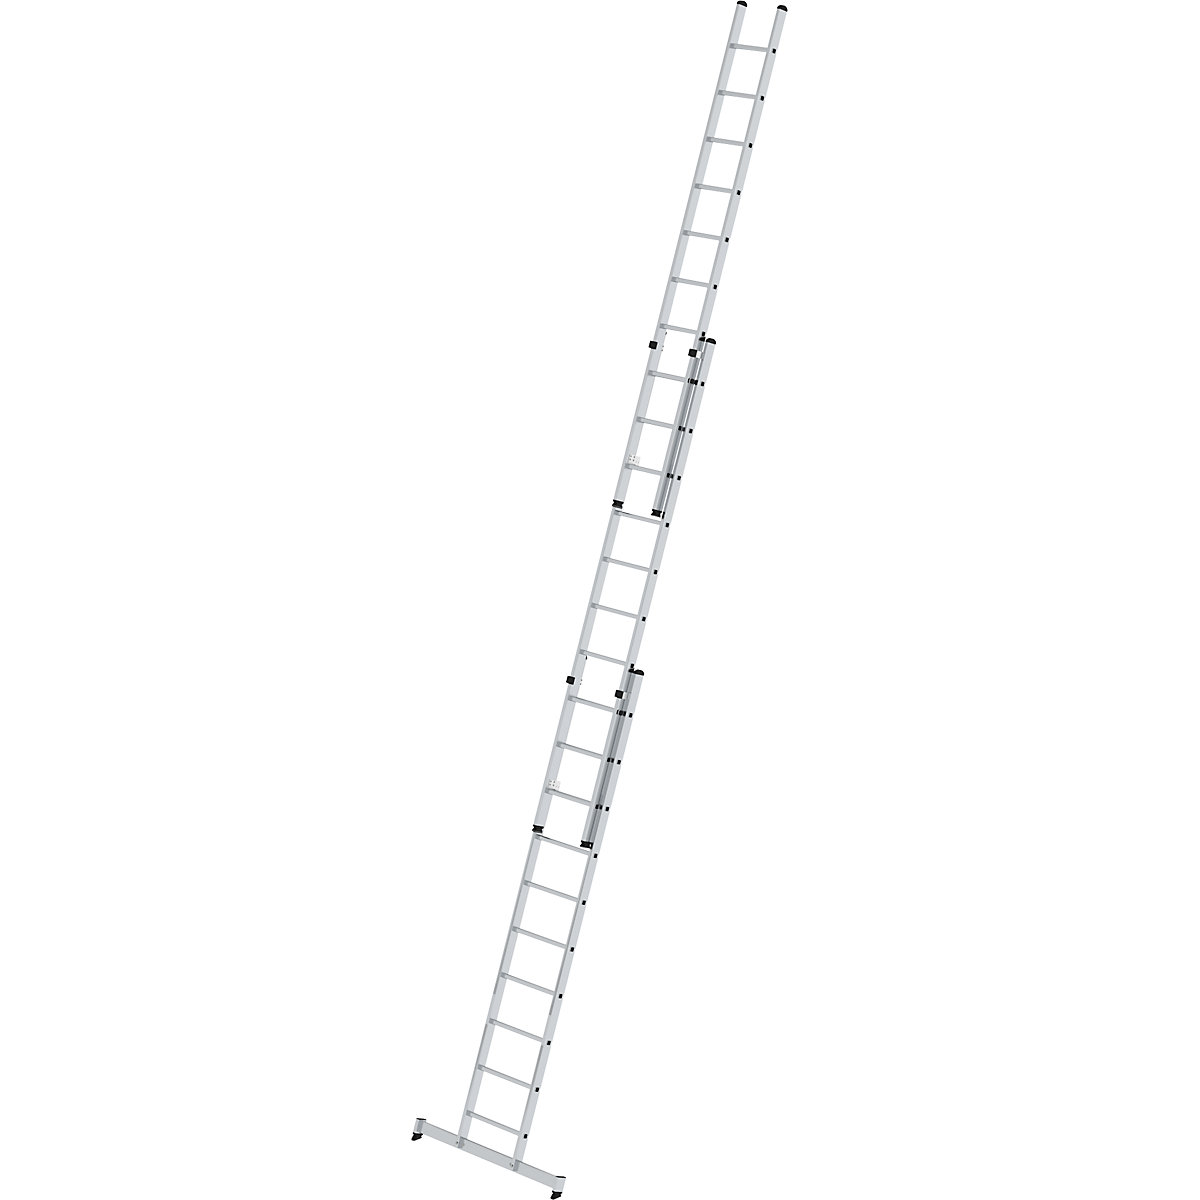 Height adjustable lean-to ladder – MUNK, extension ladder, 3-part with nivello® support, 3 x 10 rungs-8